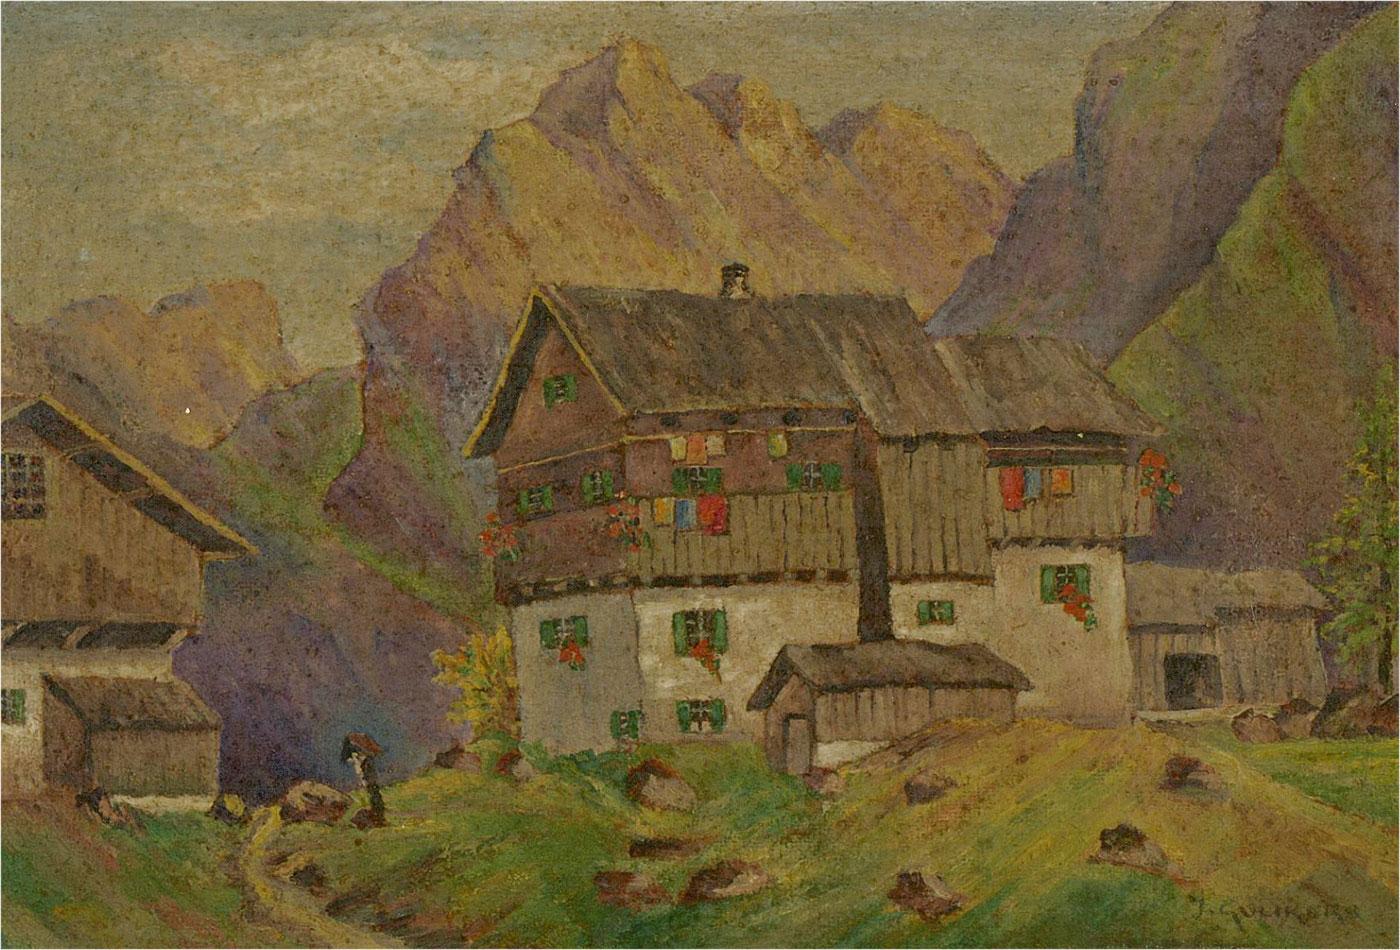 A colourful scene at a hamlet in the Alpine region of Tyrol. Presented in a white painted wooden frame. Signed to the lower-right edge. There is a label in Dutch on the verso in the artist's hand, detailing the materials of the buildings and the